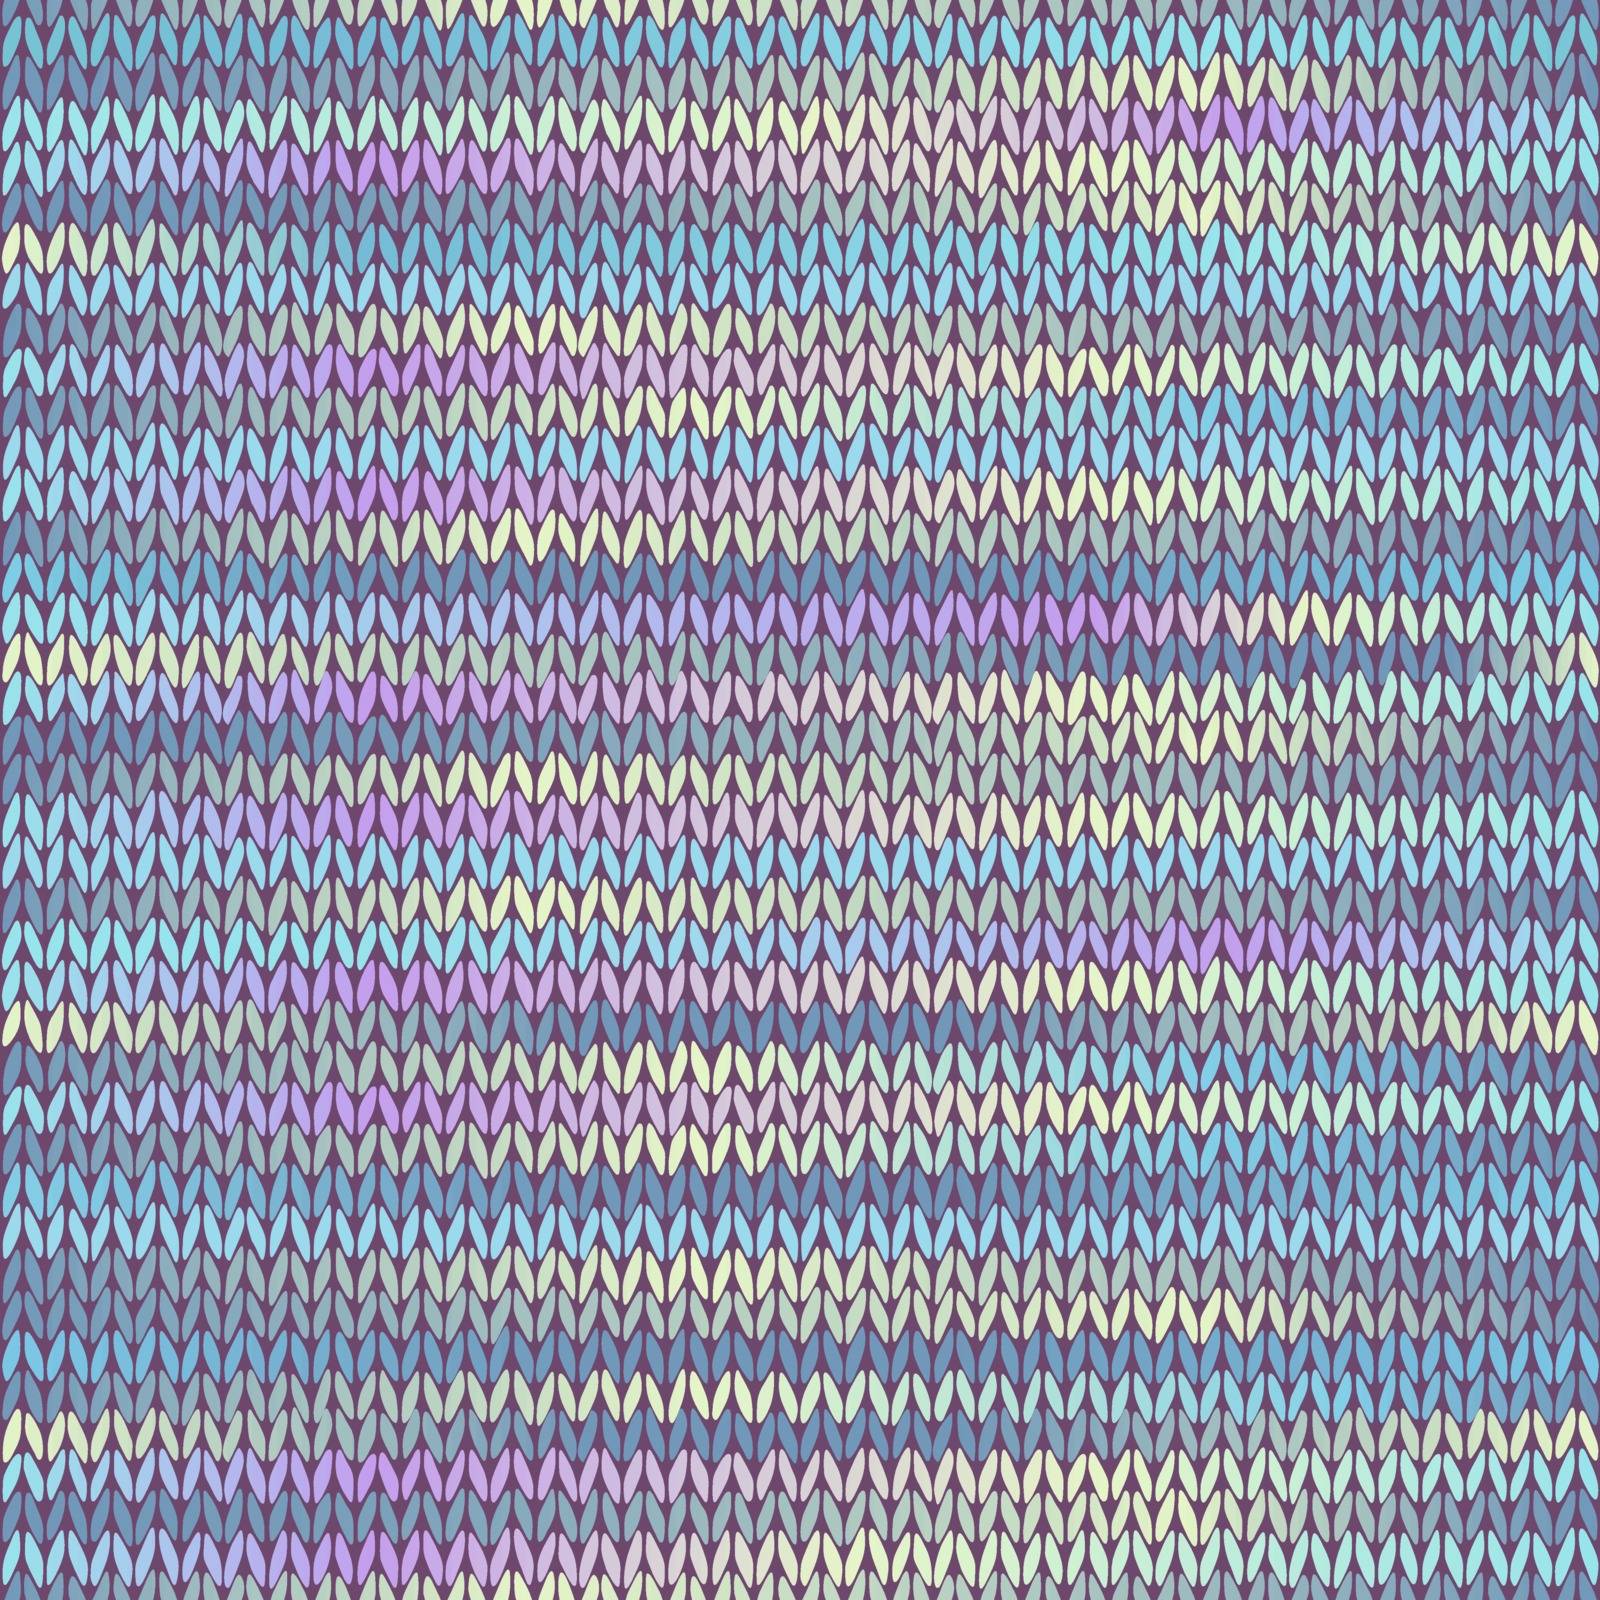 Fabric texture. Melange Seamless Knitted Pattern. Blue Yellow Pink Color Vector Illustration.